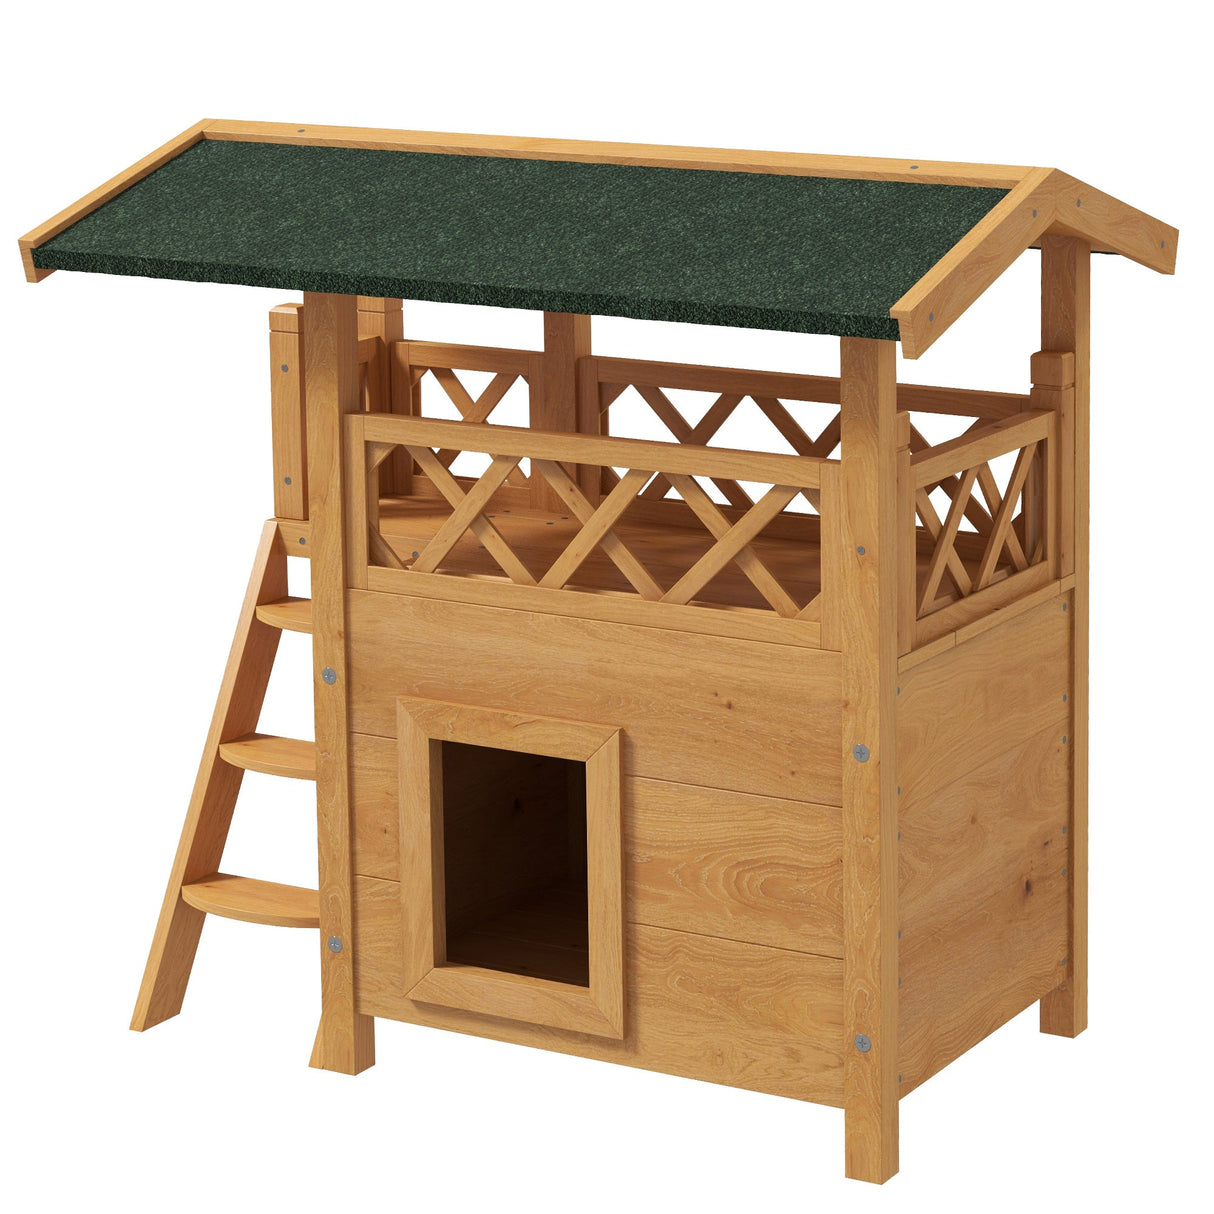 Outdoor Cat House with Balcony & Asphalt Roof | Cats up to 4 kg, PawHut, Natural